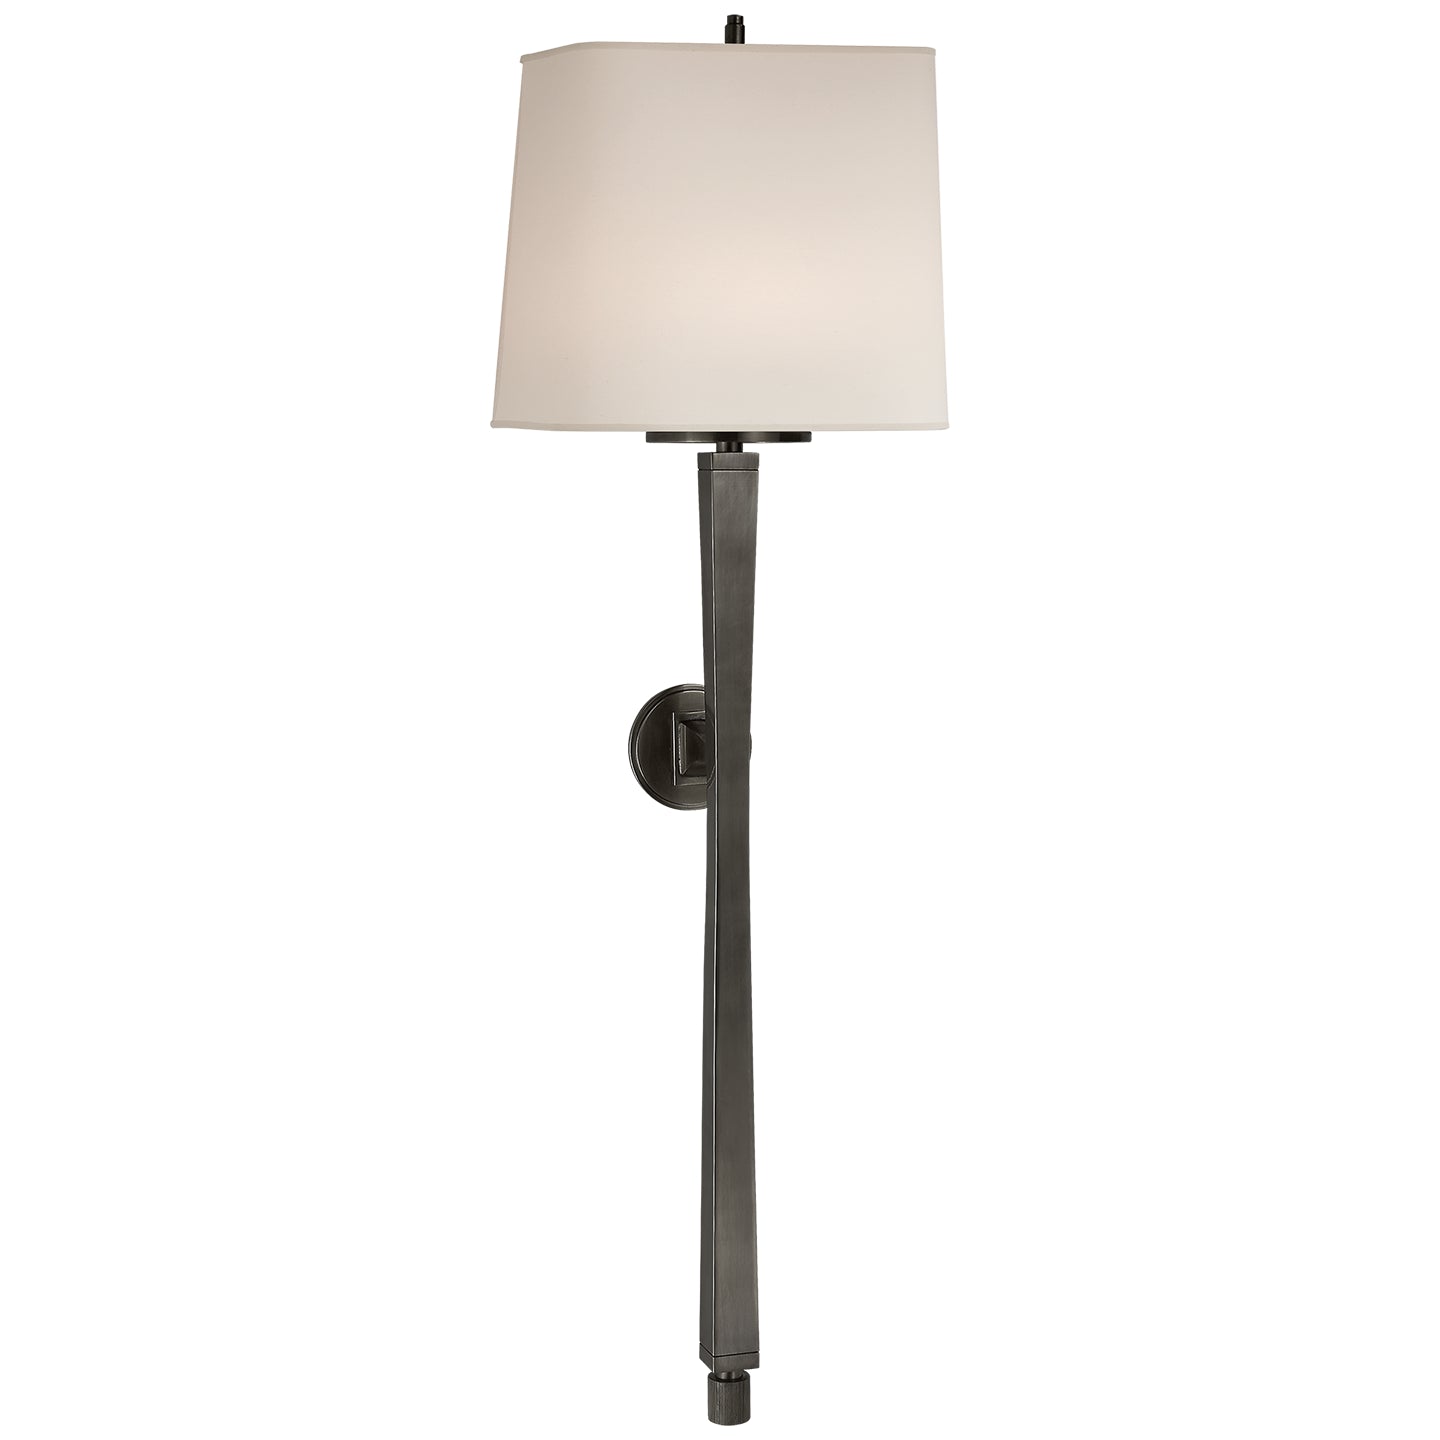 Visual Comfort Signature - TOB 2741BZ-NP - Two Light Wall Sconce - Edie - Bronze